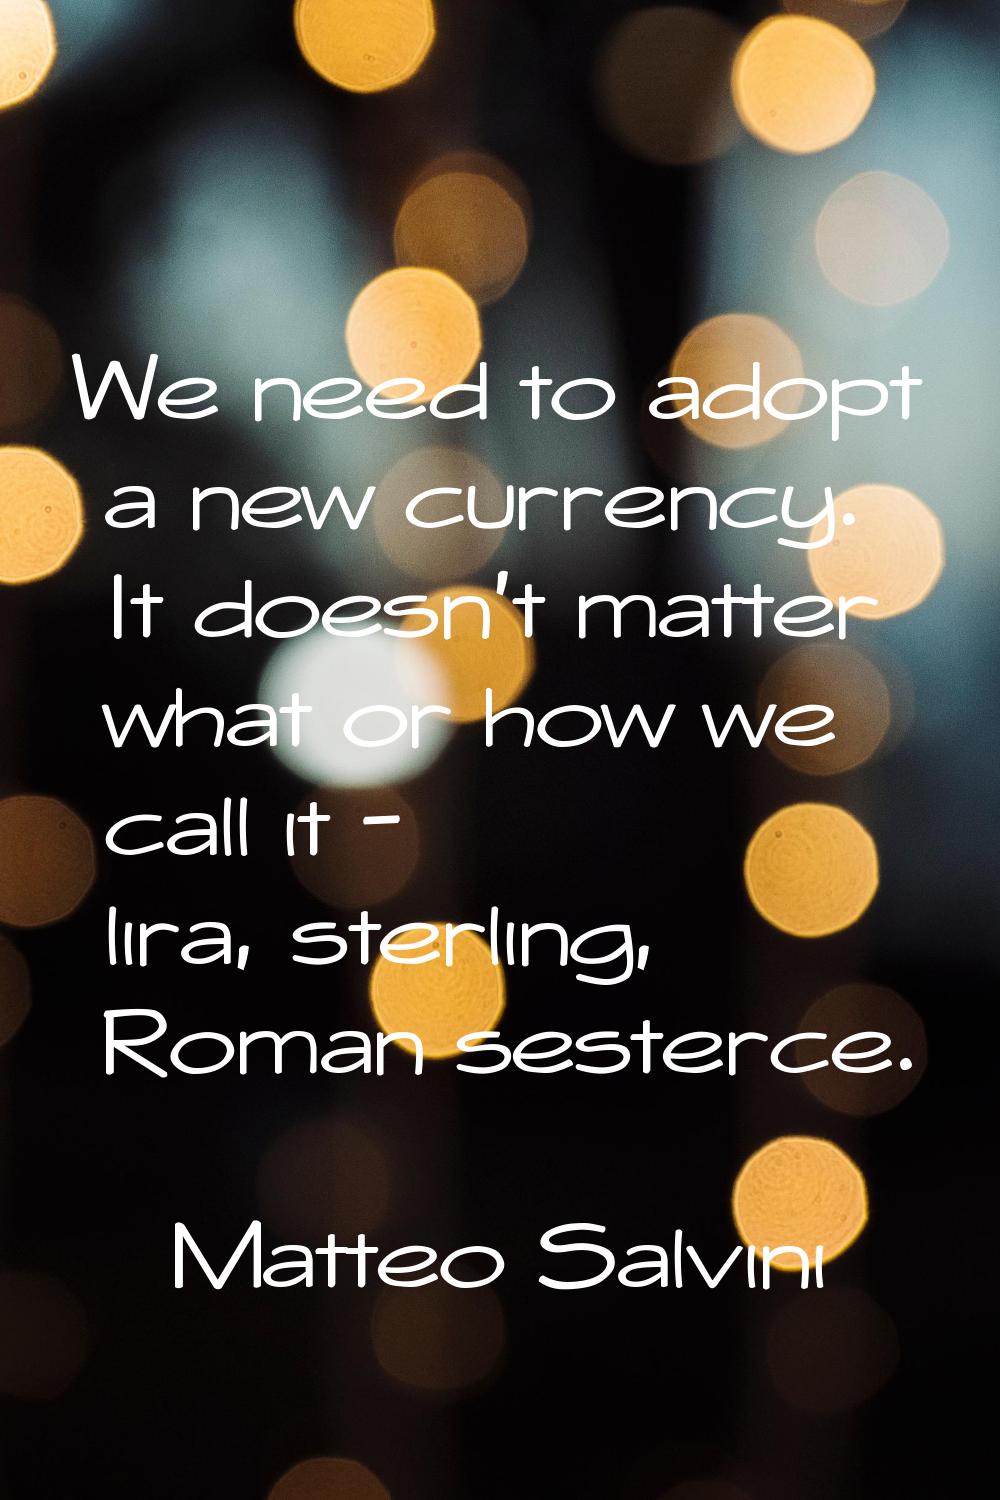 We need to adopt a new currency. It doesn't matter what or how we call it - lira, sterling, Roman s